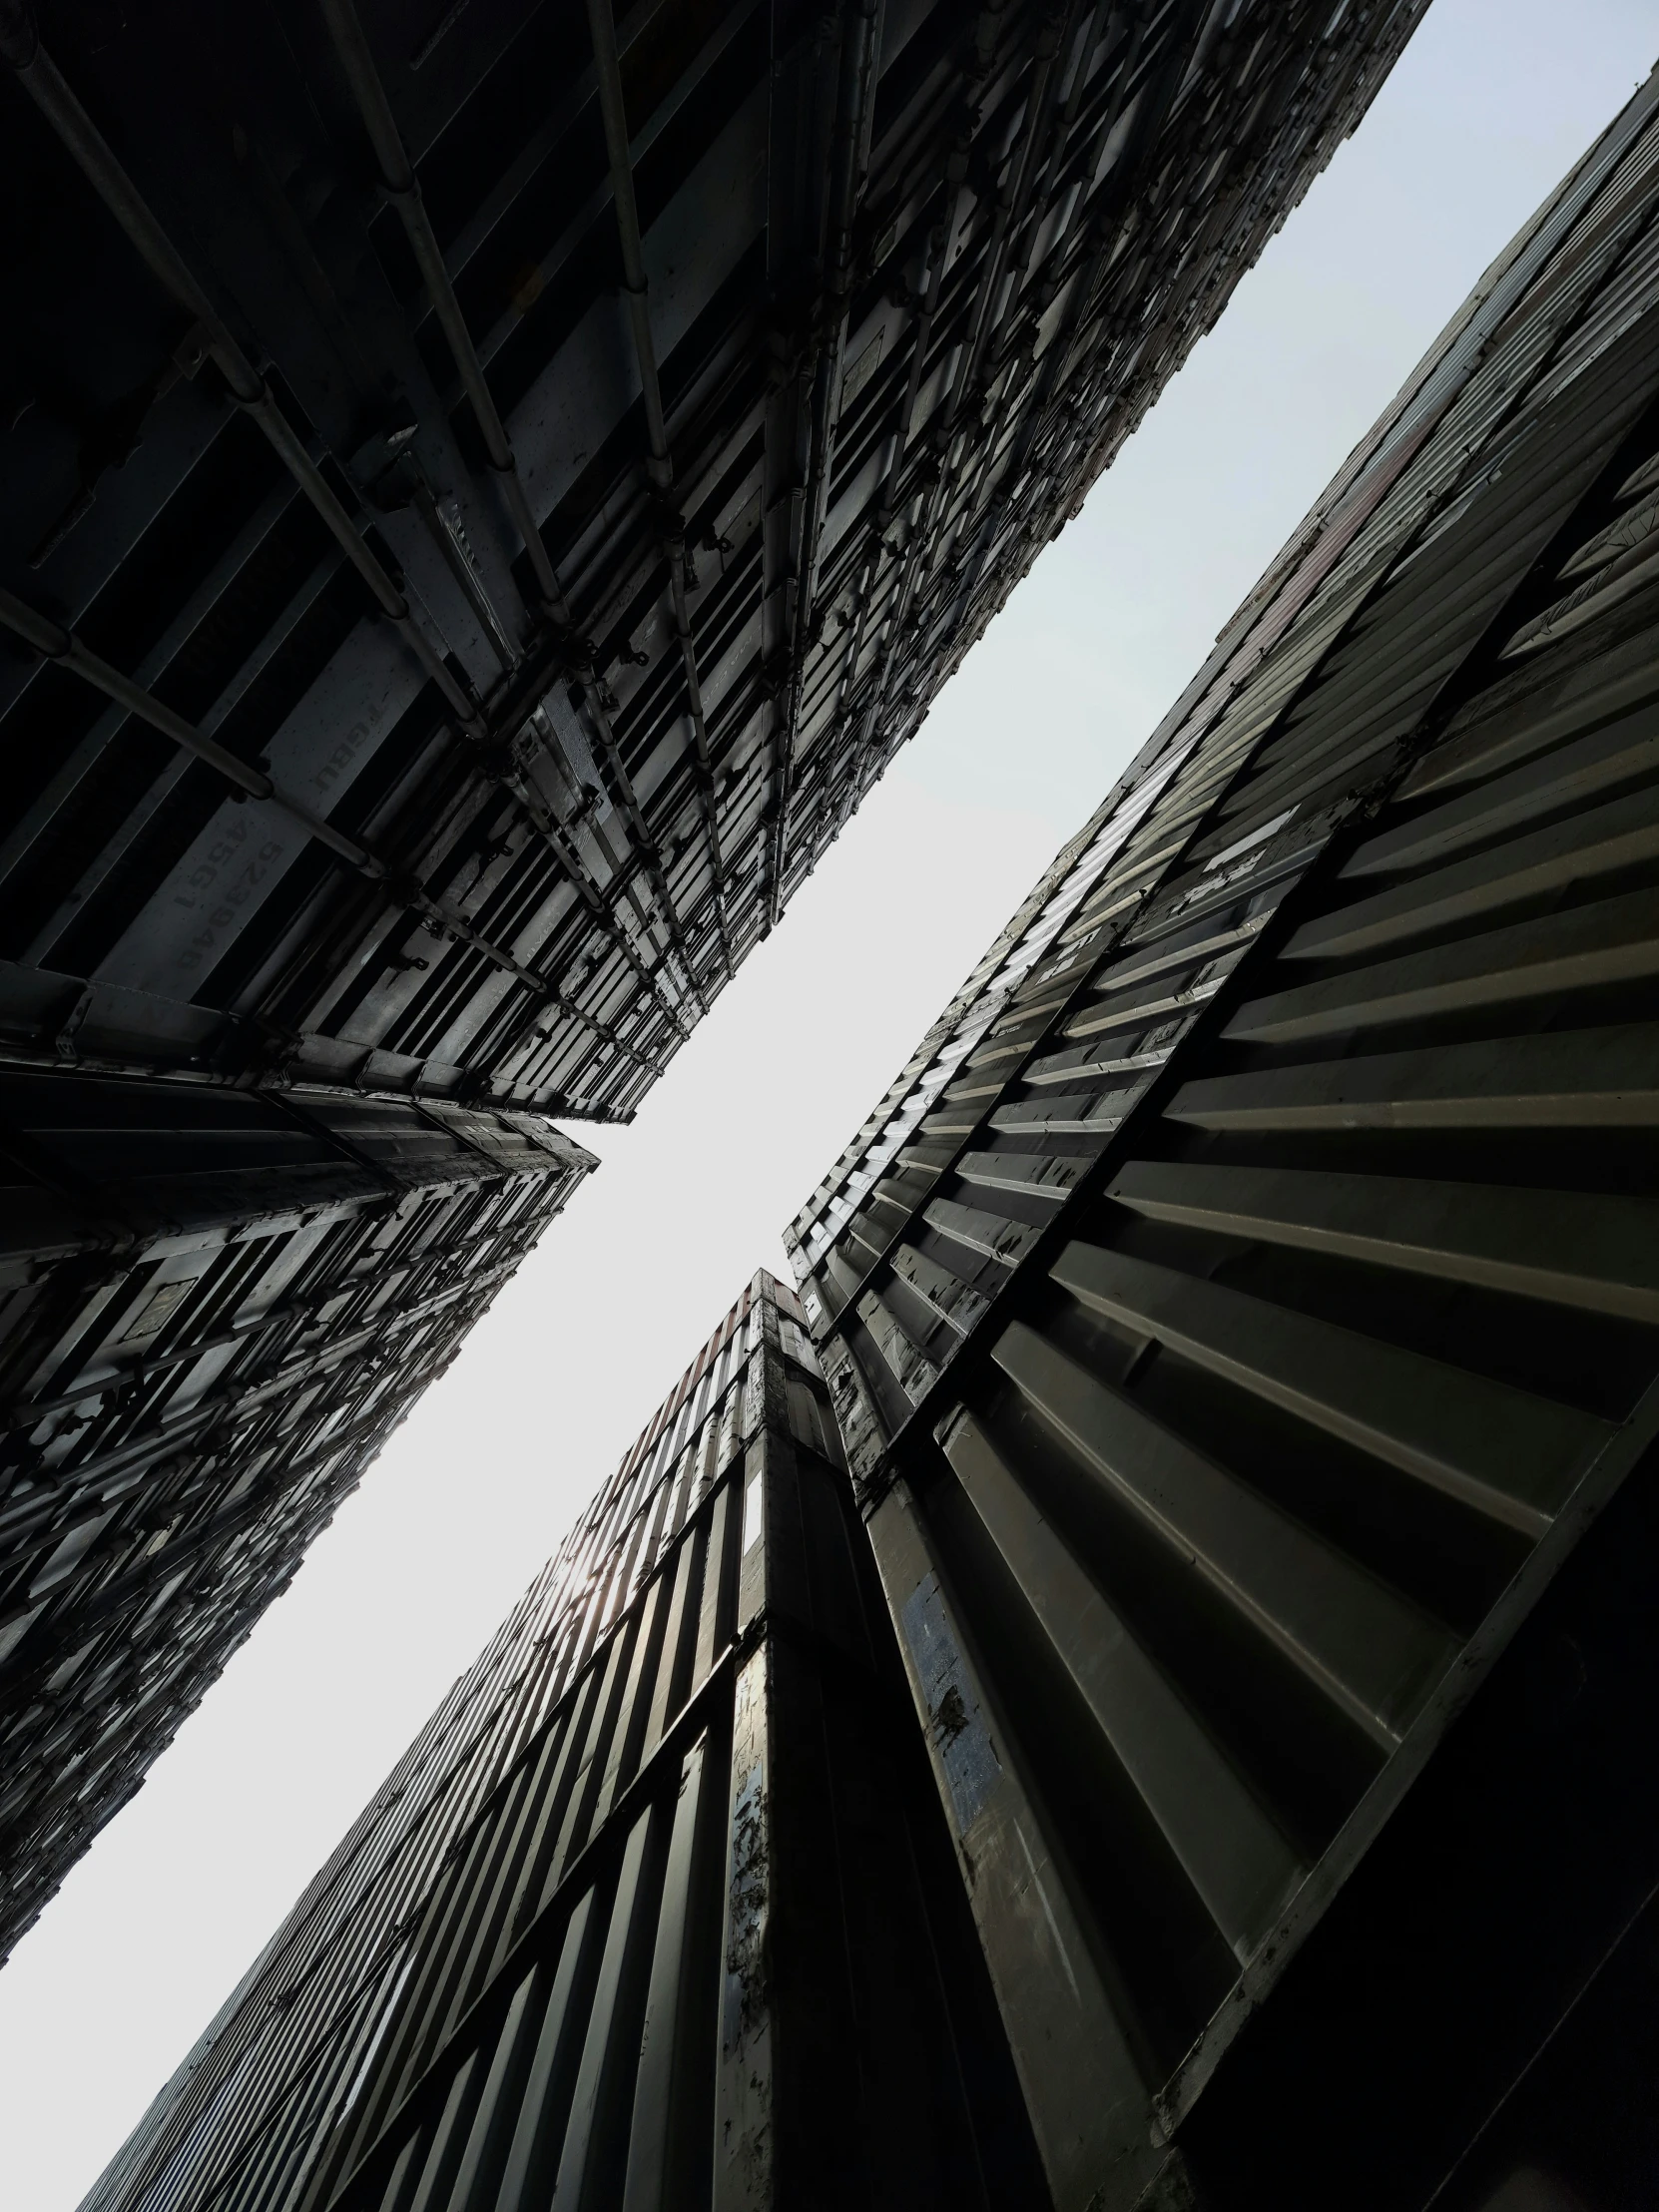 looking up at the tops of multiple metal structures